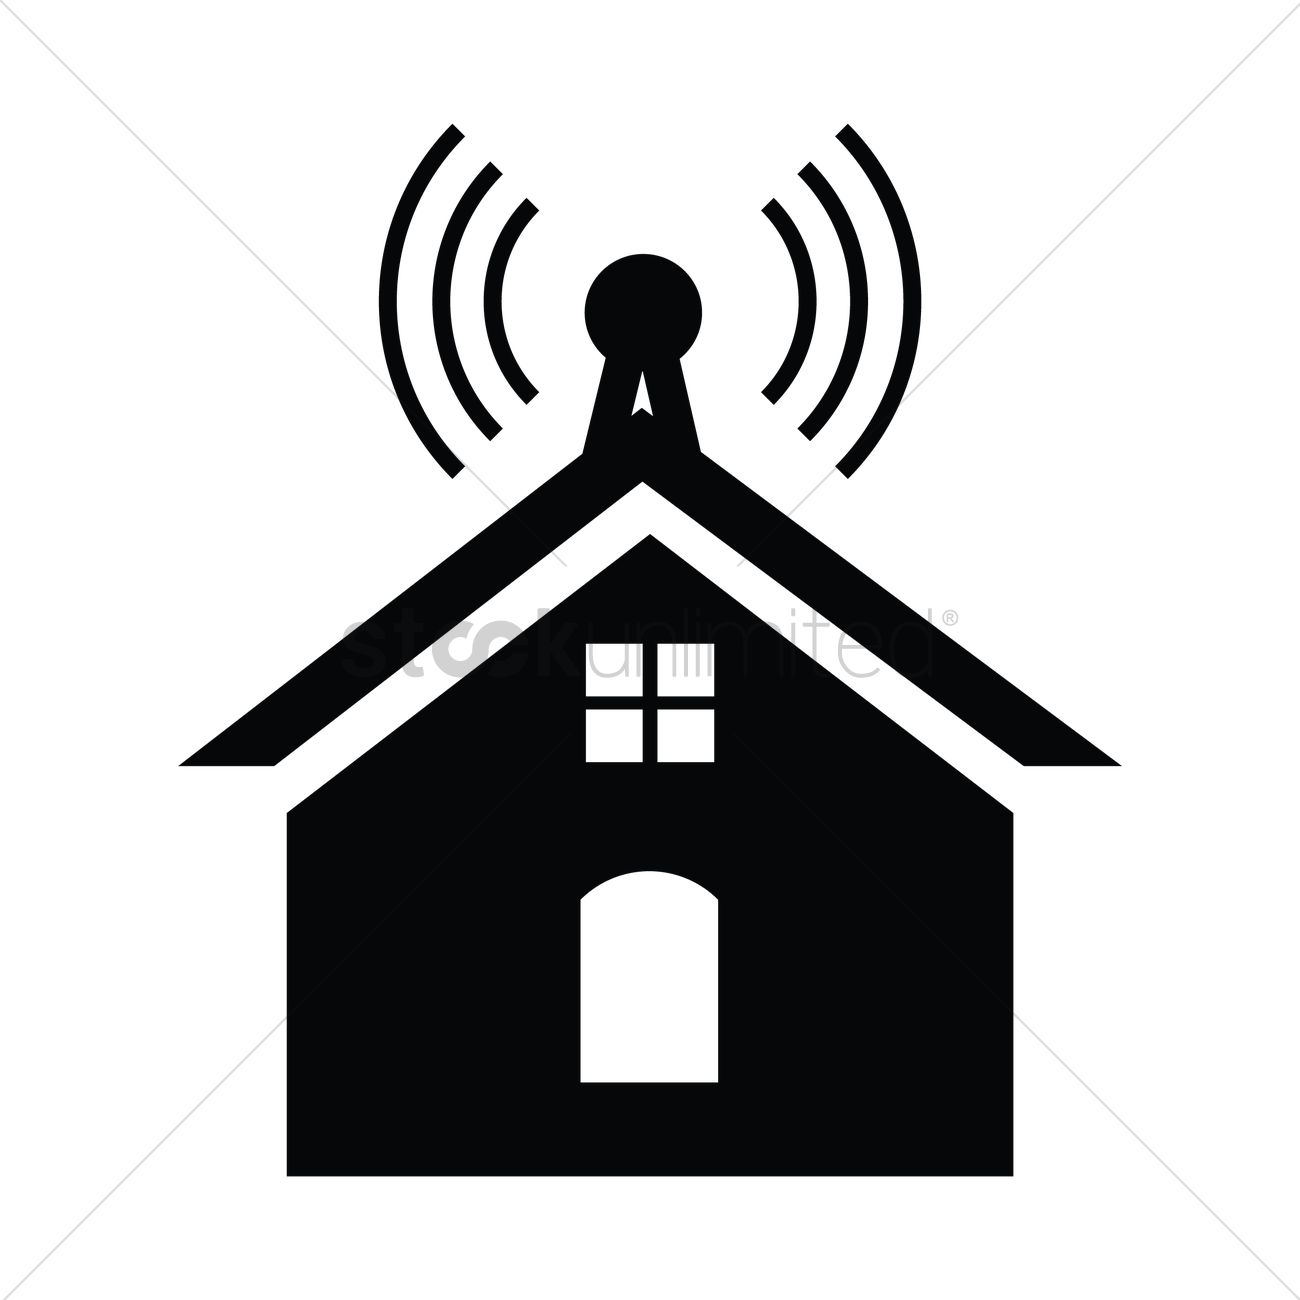 103-900-home-wifi-illustrations-royalty-free-vector-graphics-clip-art-library